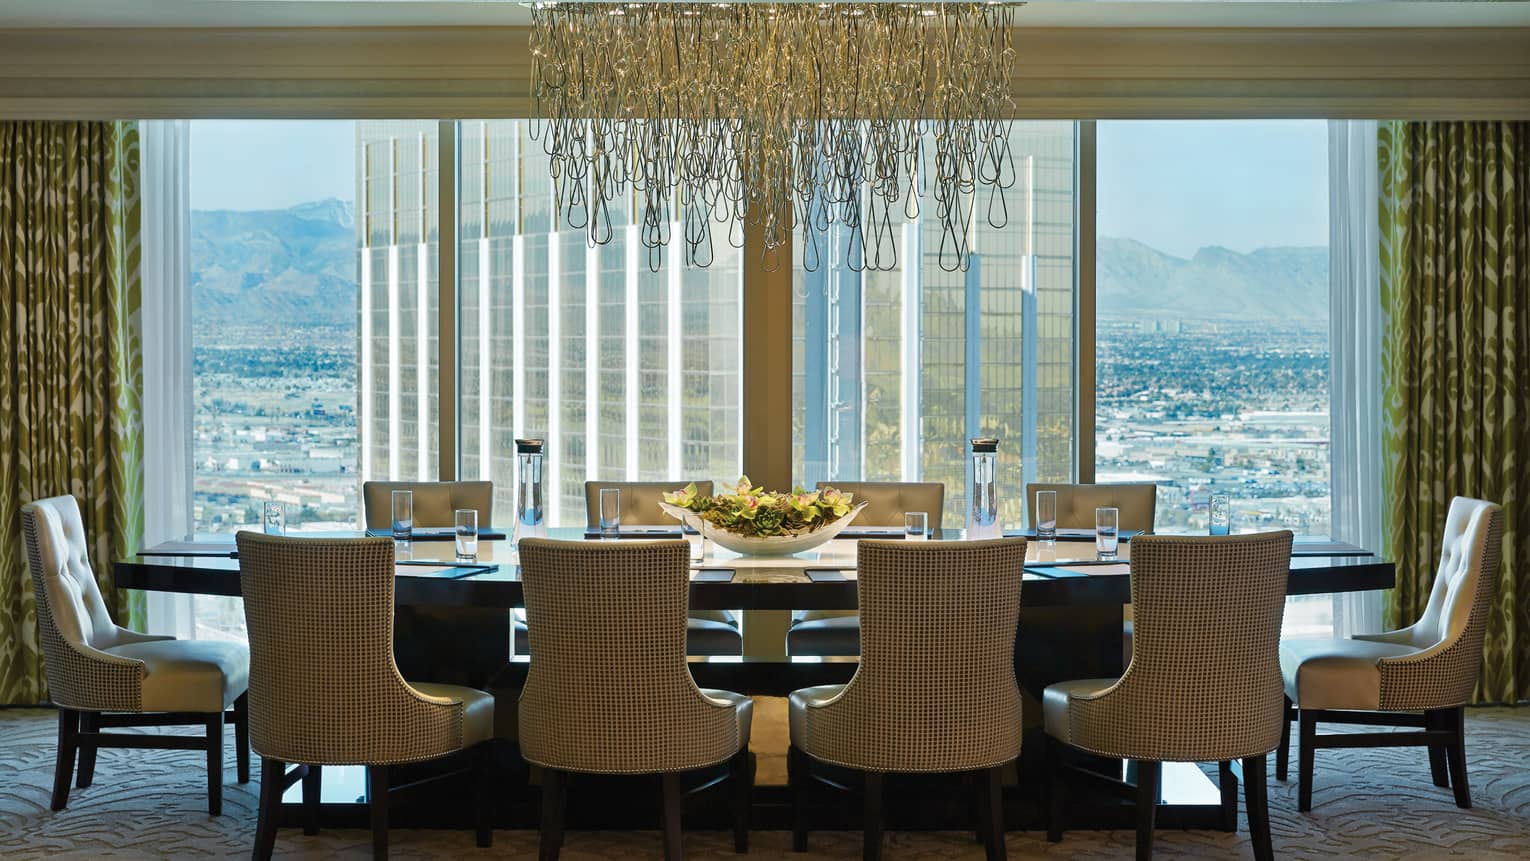 Private dining table under modern artistic chandelier by floor-to-ceiling windows 